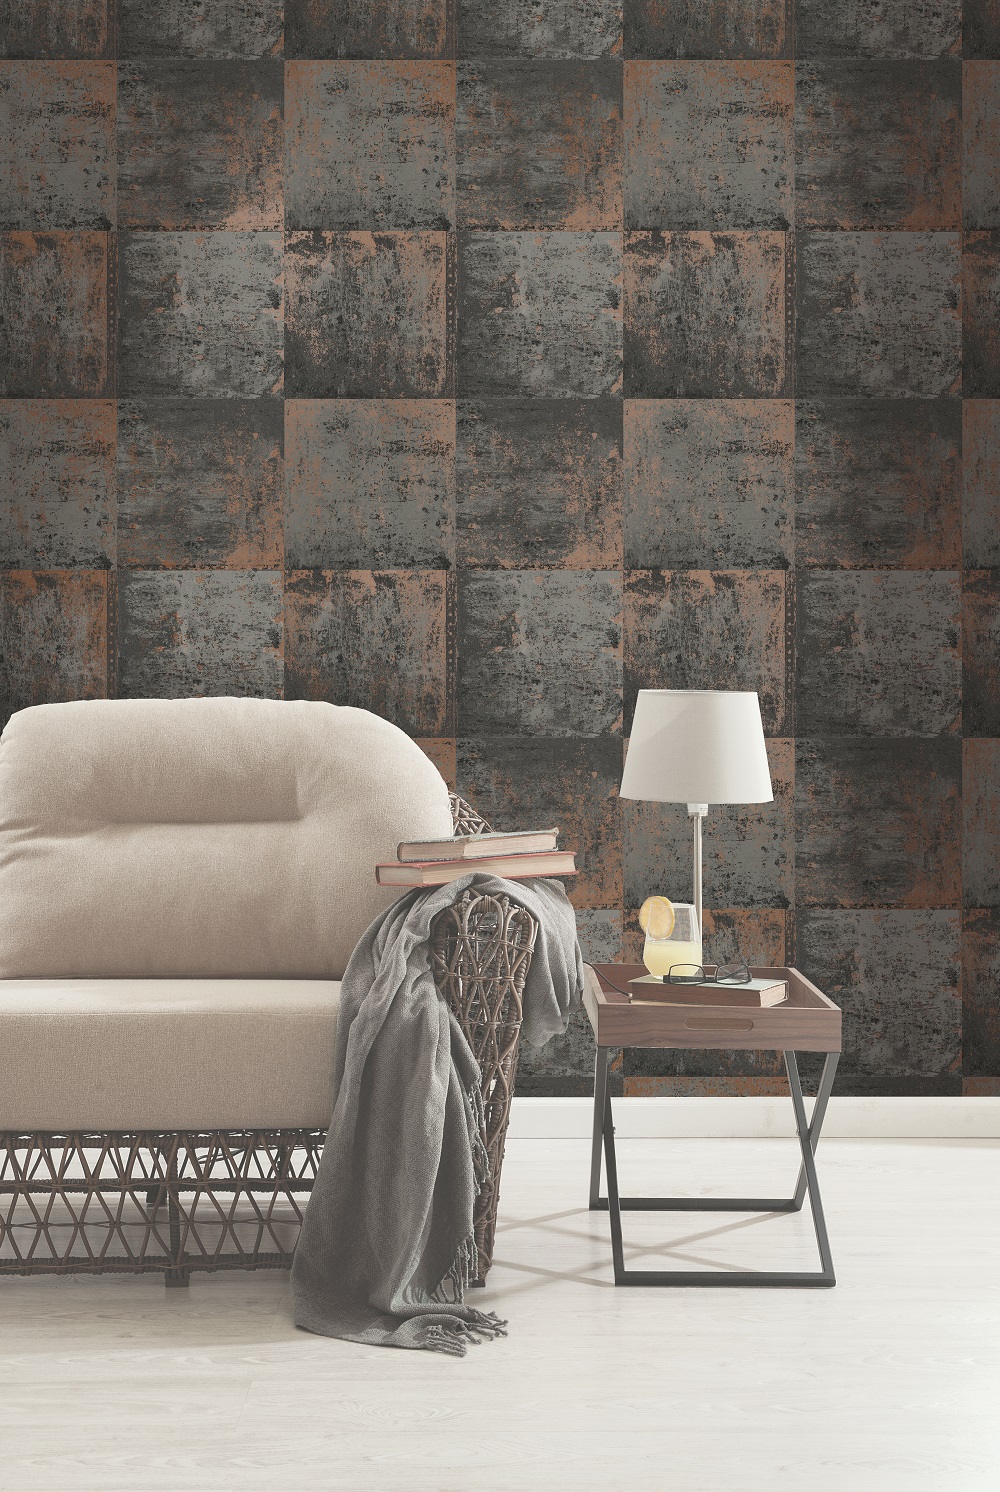 grey and copper wallpaper,furniture,wall,room,couch,floor